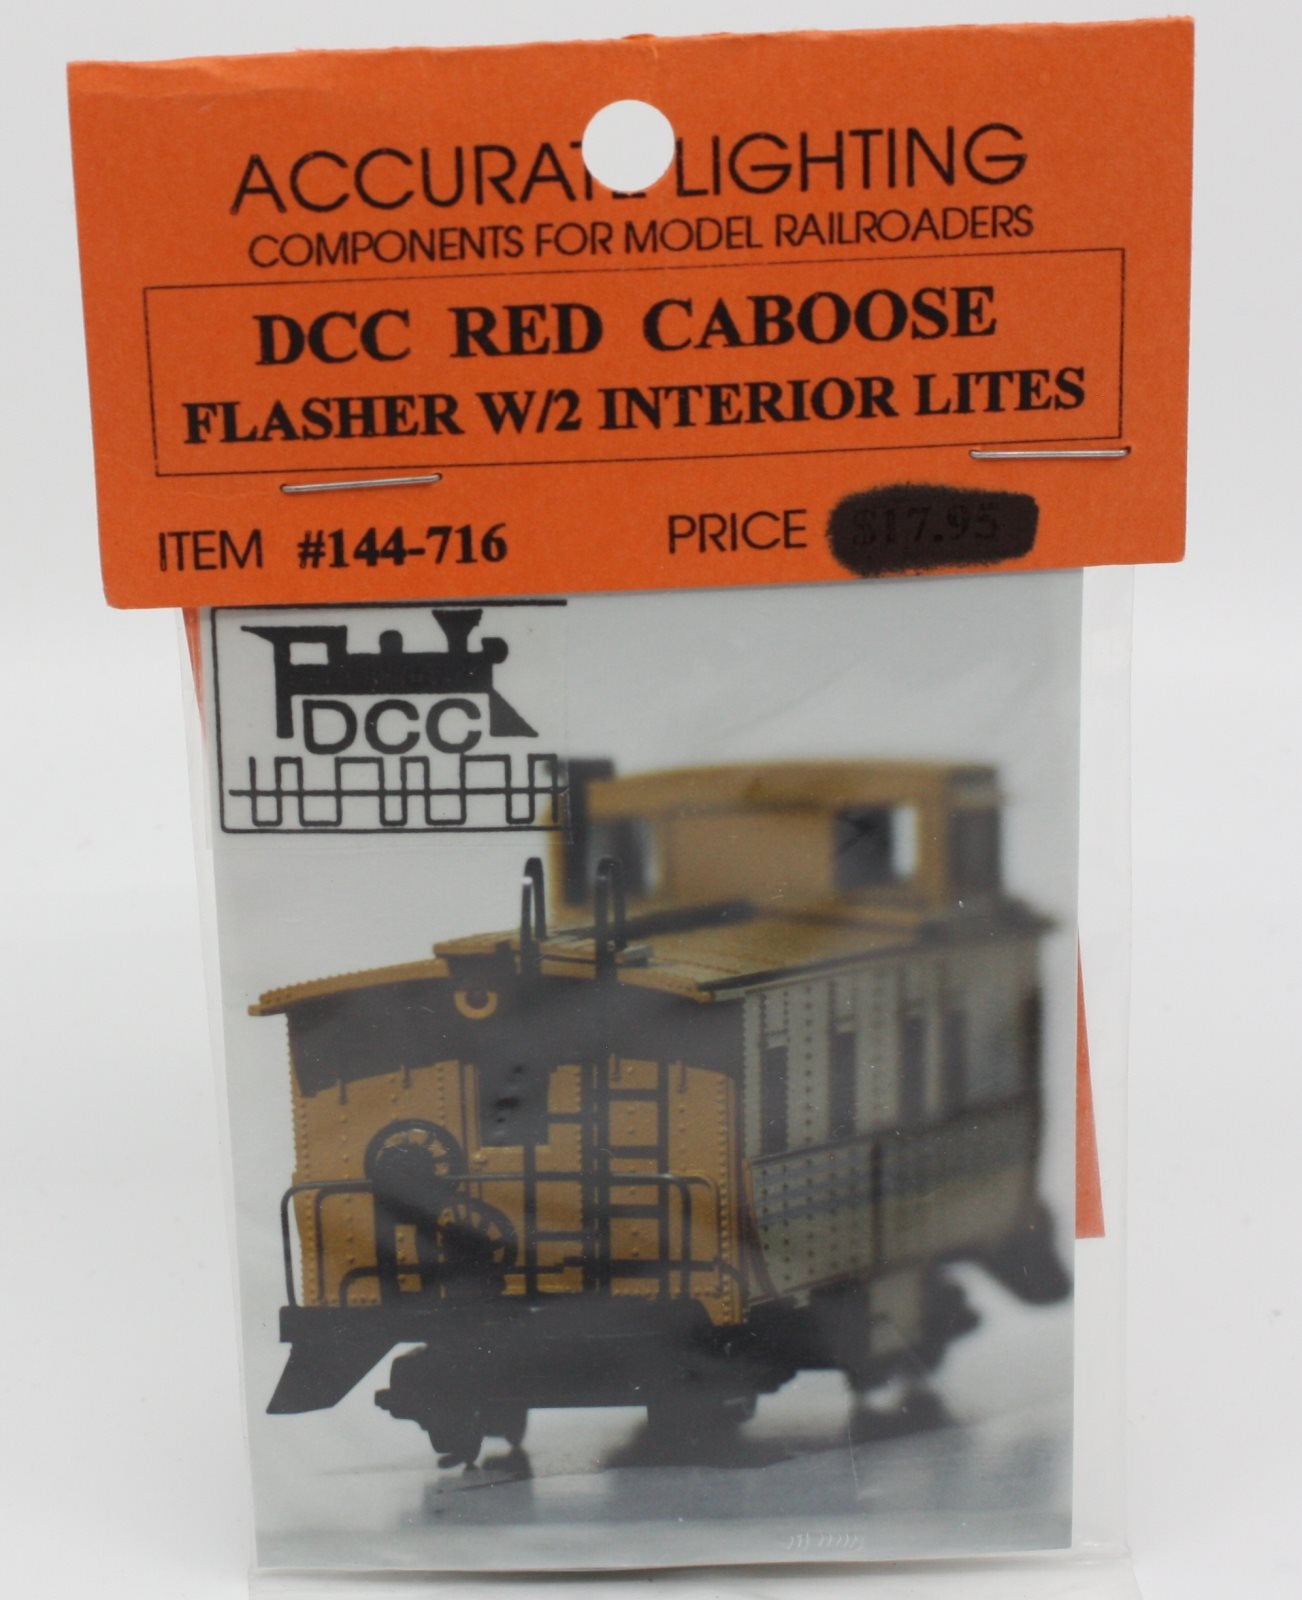 Accurate Lighting 144-716 DCC Red Caboose Flasher W/2 Interior Lites